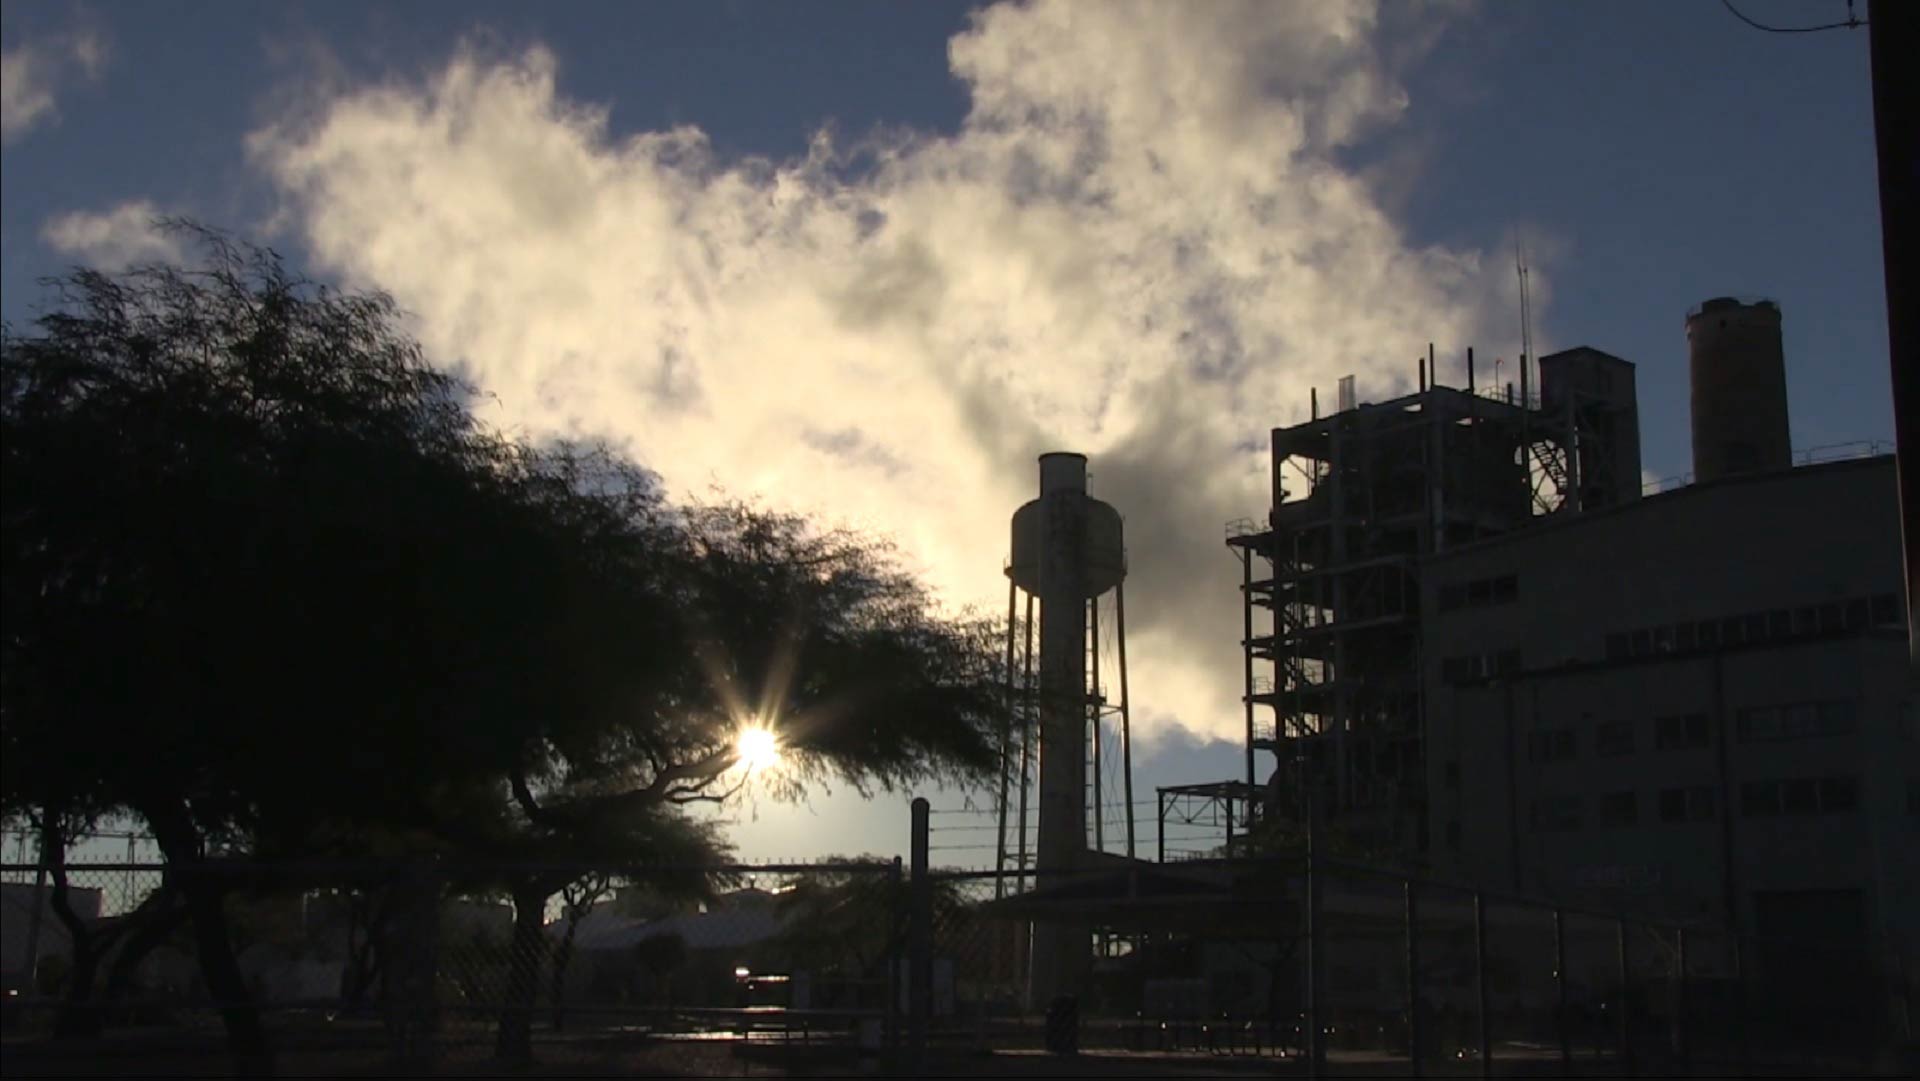 The H.Wilson Sundt Generating Station at 3950 E. Irvington Road is seen in this image from a Tucson Electric Power video on YouTube.